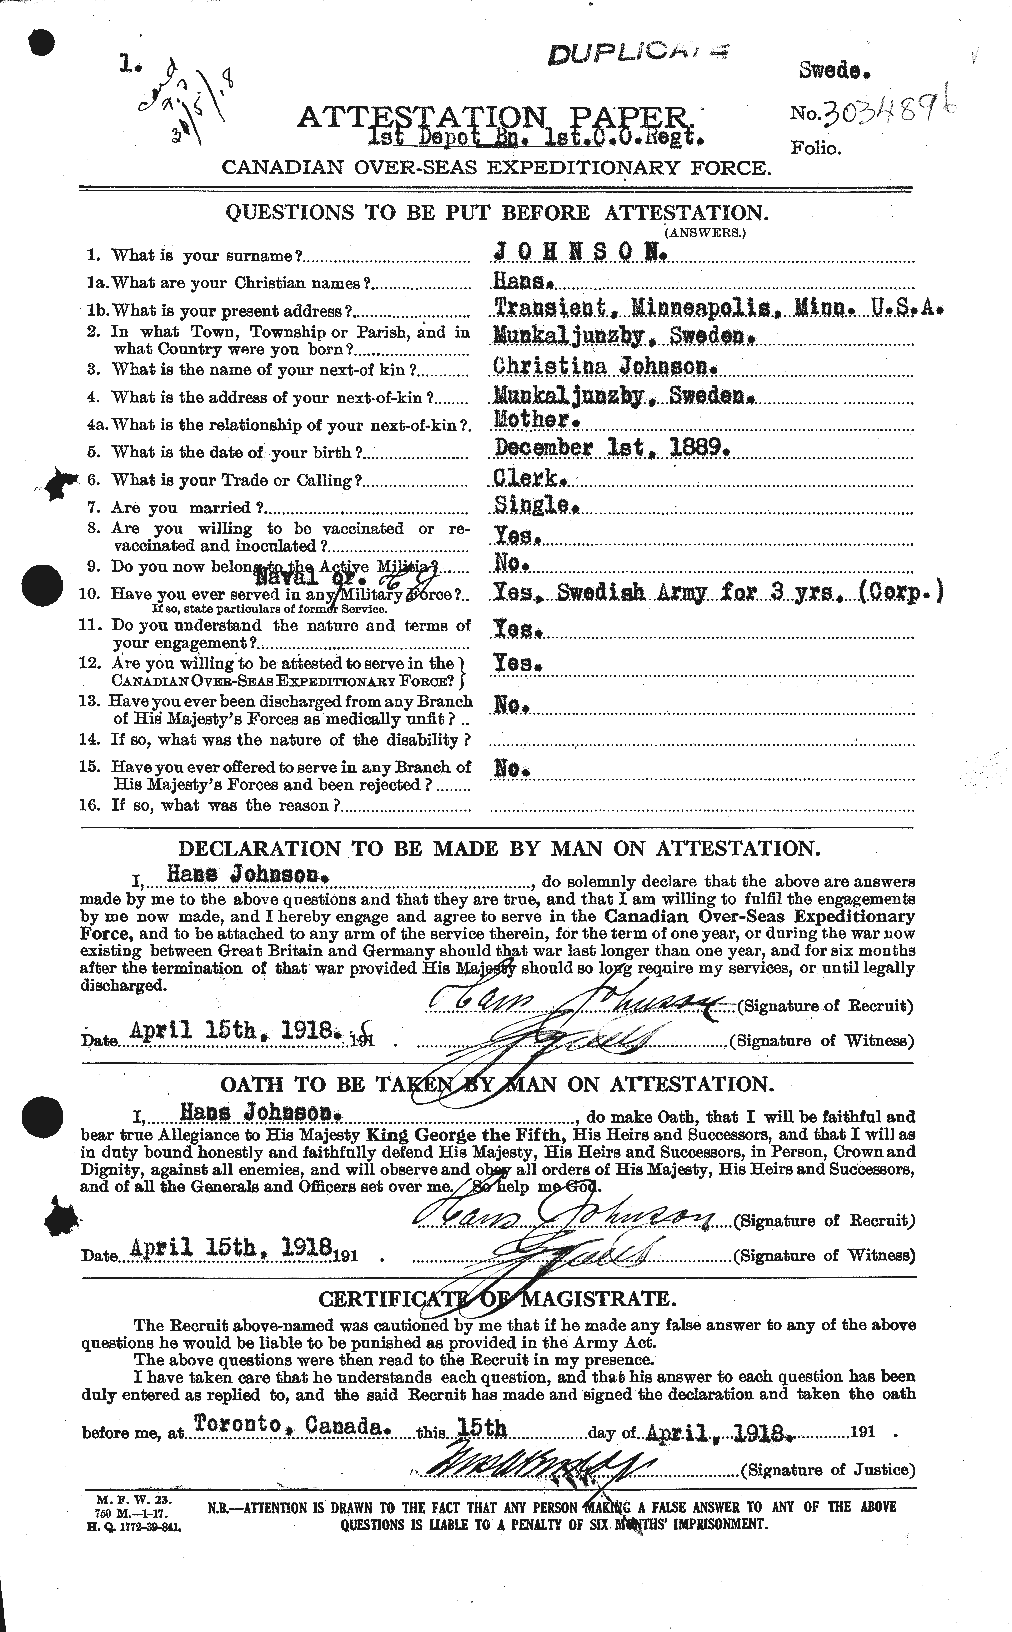 Personnel Records of the First World War - CEF 420409a